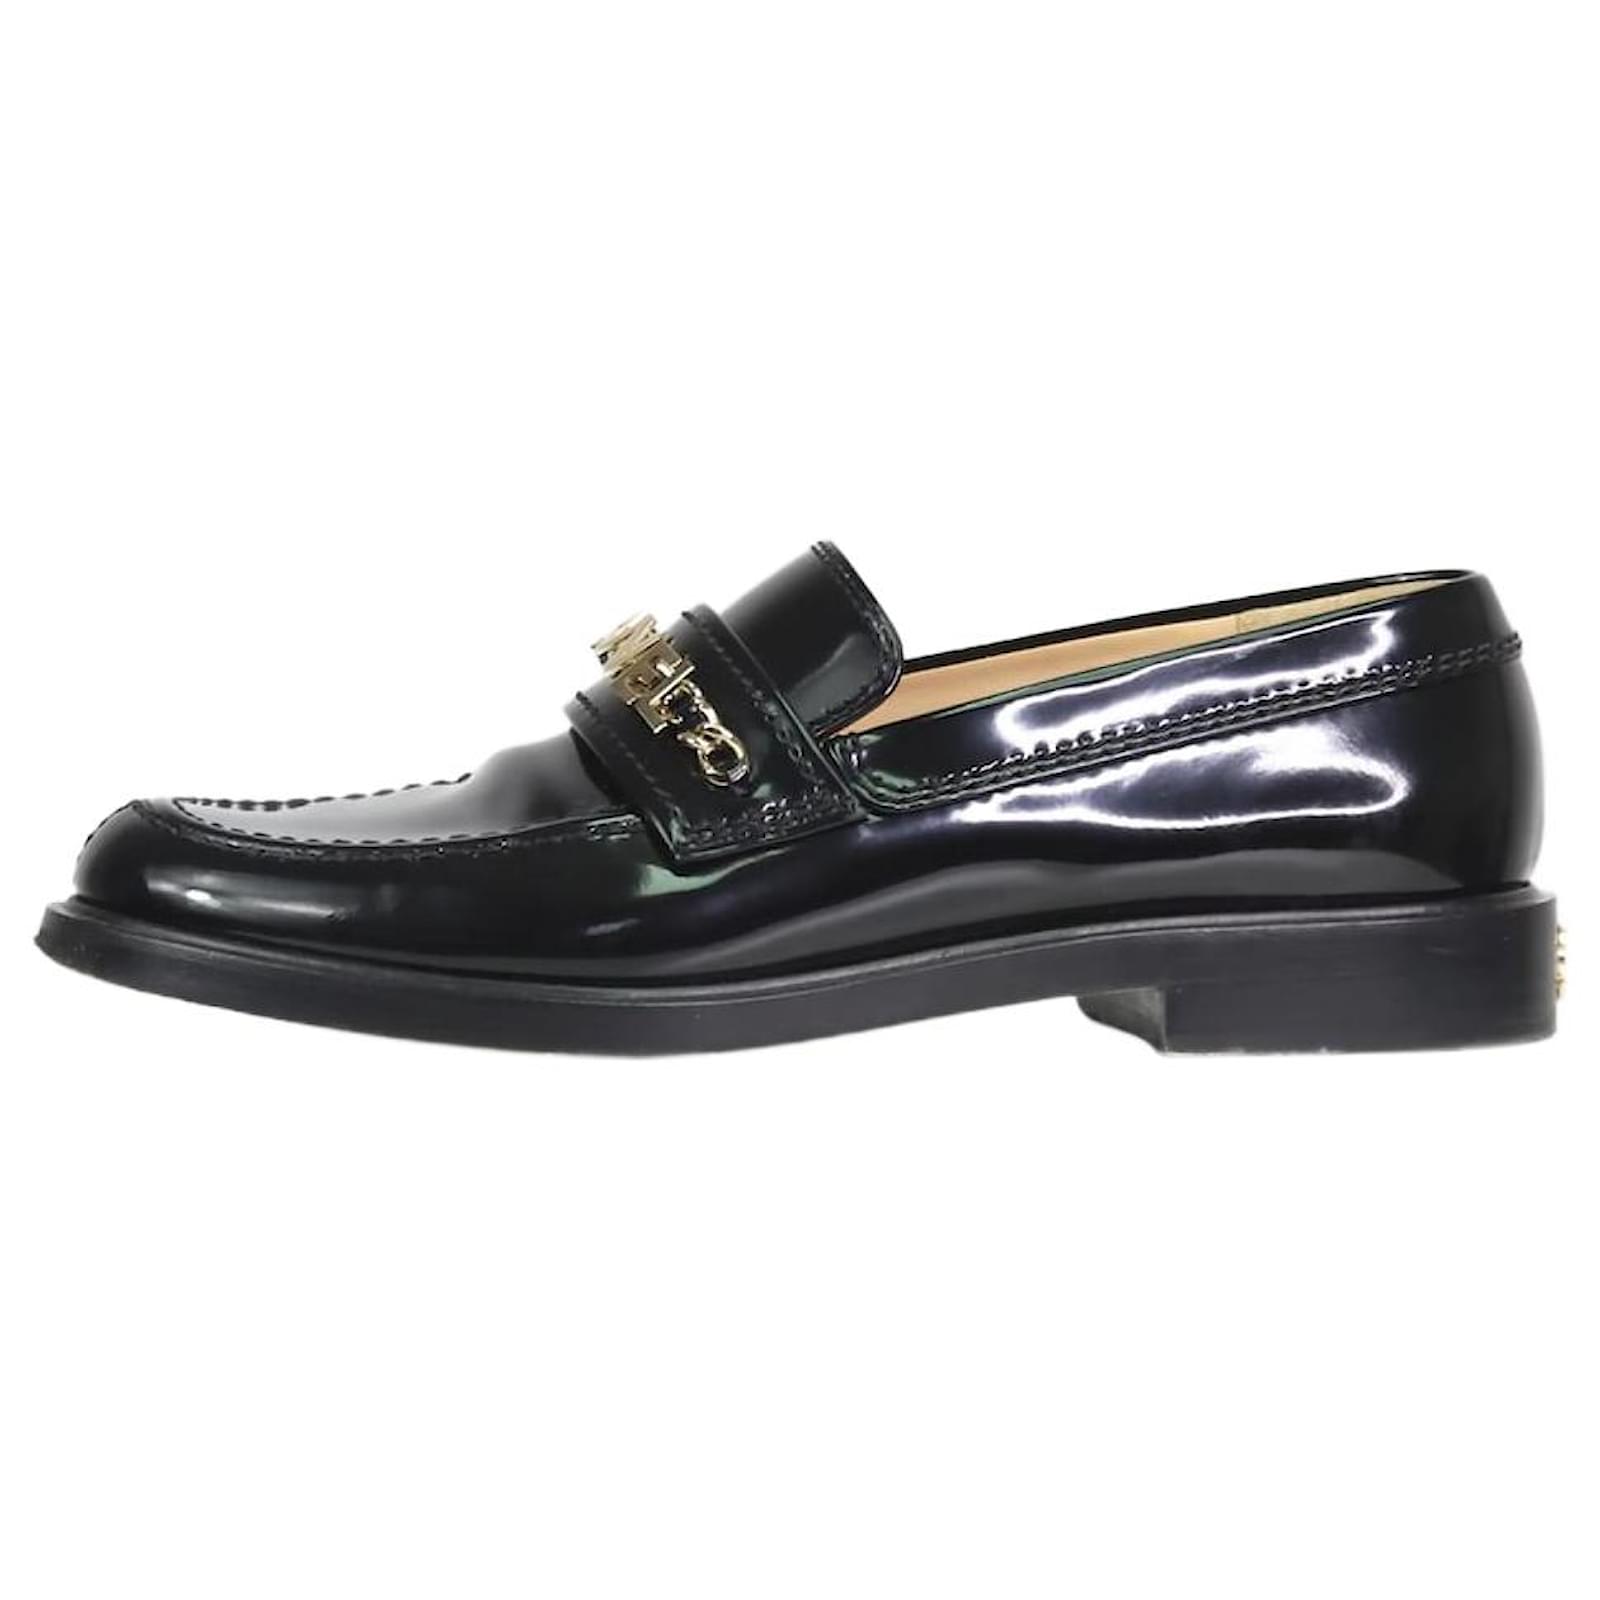 The Row Canal Leather Loafers - Black - 5